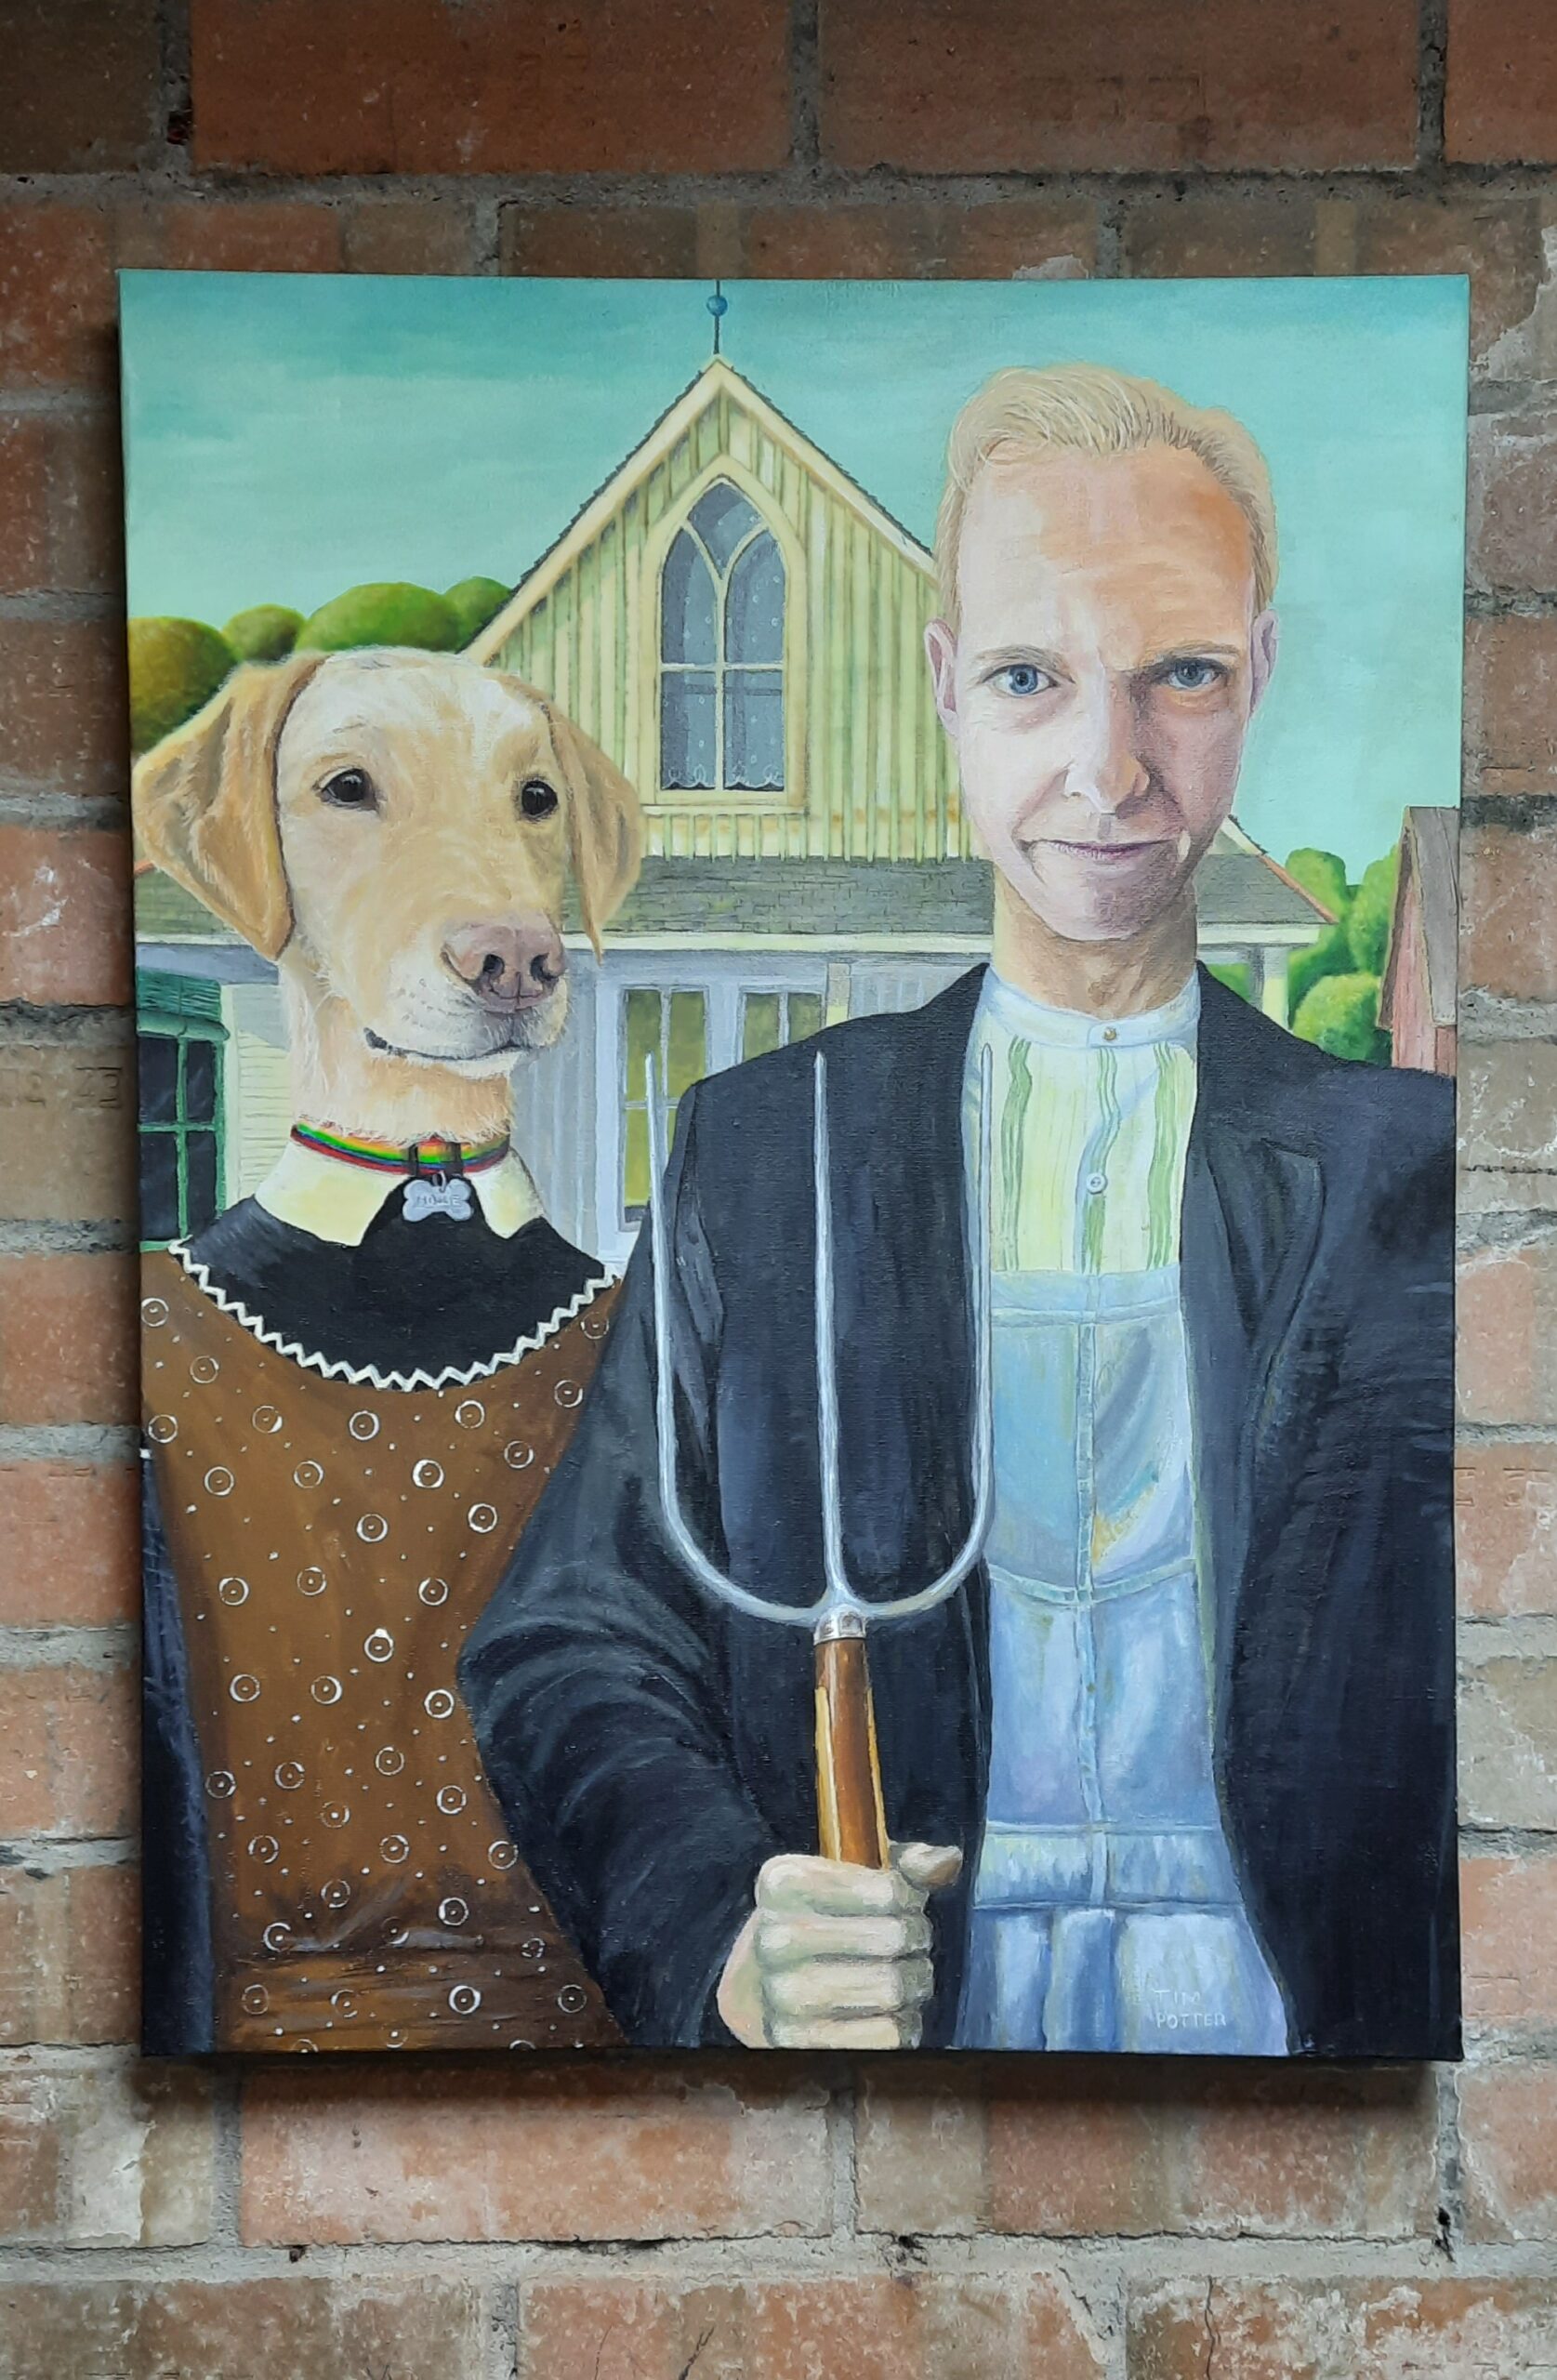 Arylic Painting based on American Gothic showing a man and his dog